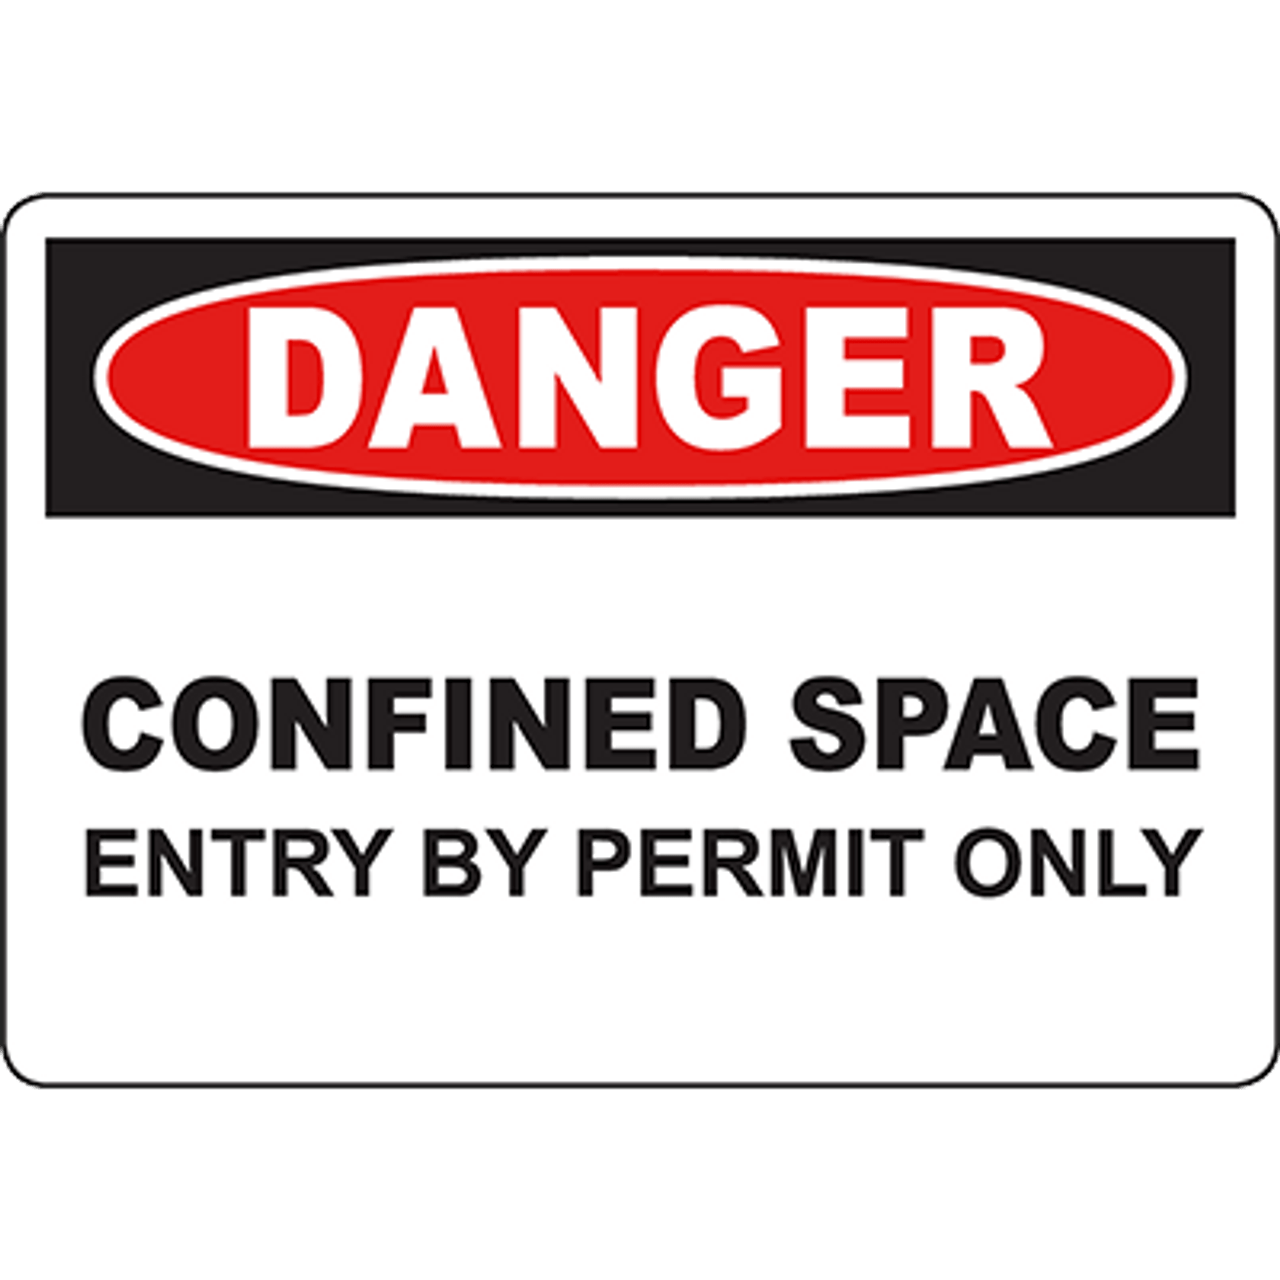 Danger Confined Space Entry By Permit Only Osha Sign Graphic Products